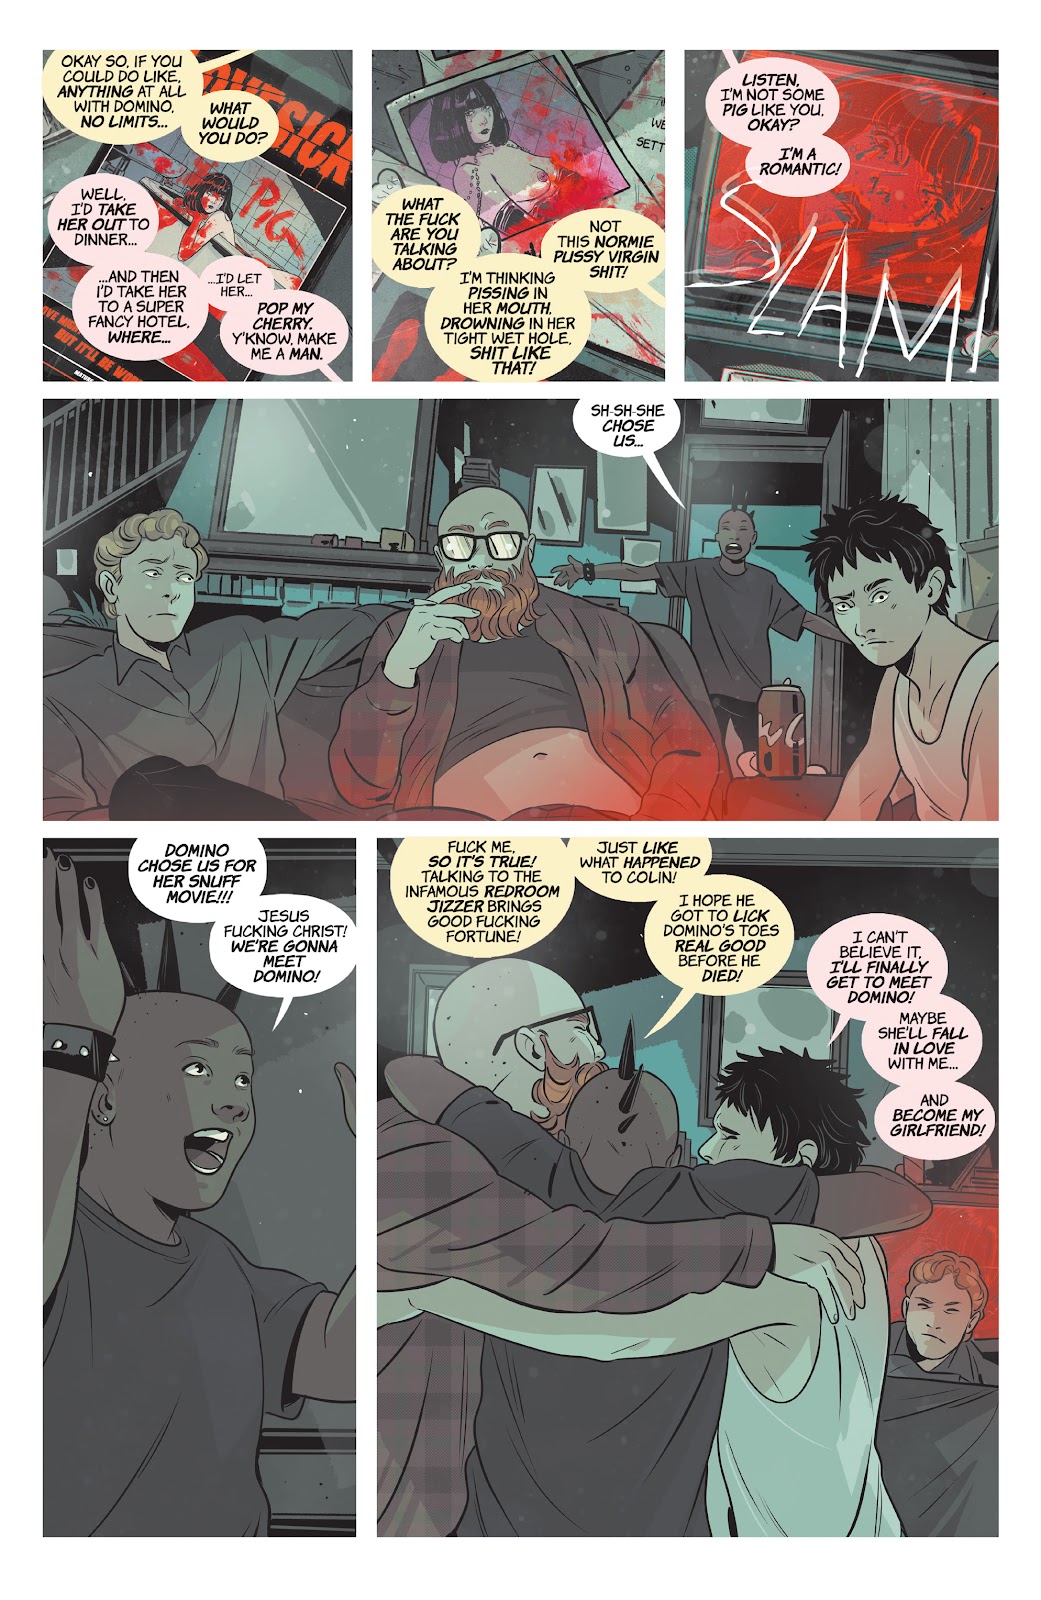 Lovesick issue 7 - Page 4